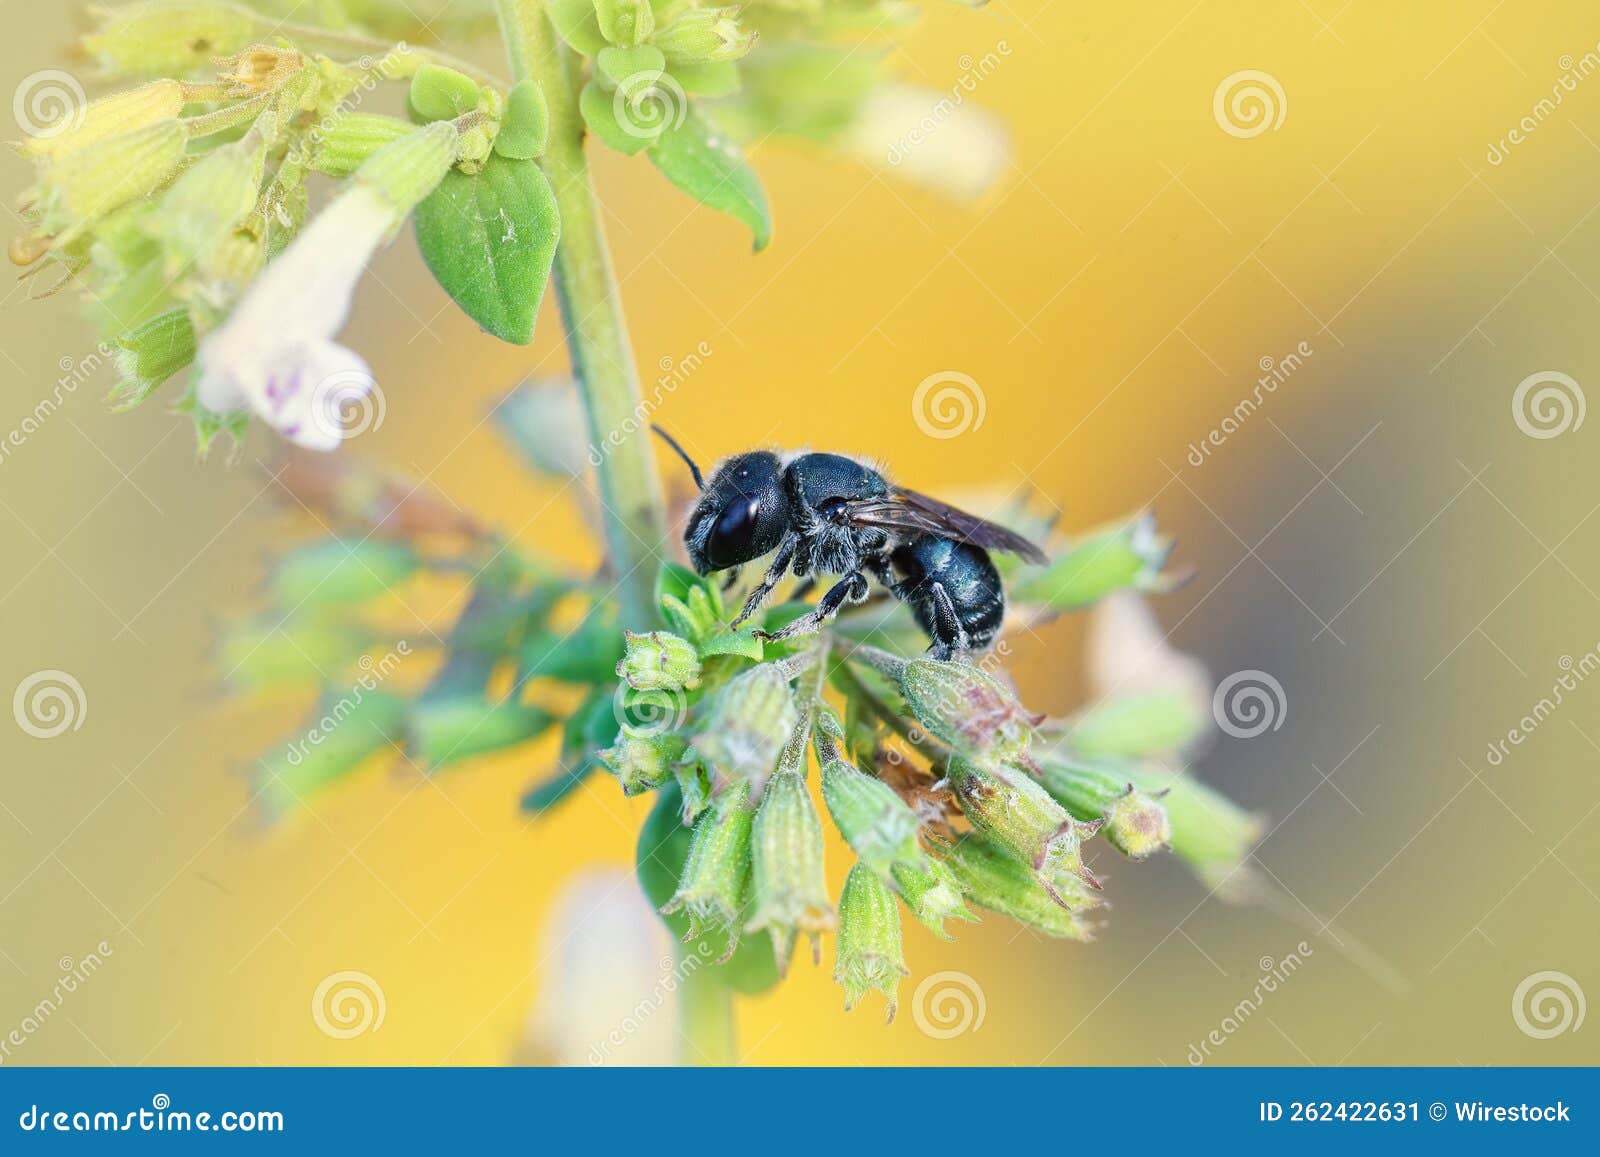 close-up shot of a small dark osmia caerulescens bee on a beautiful flower in gard, france